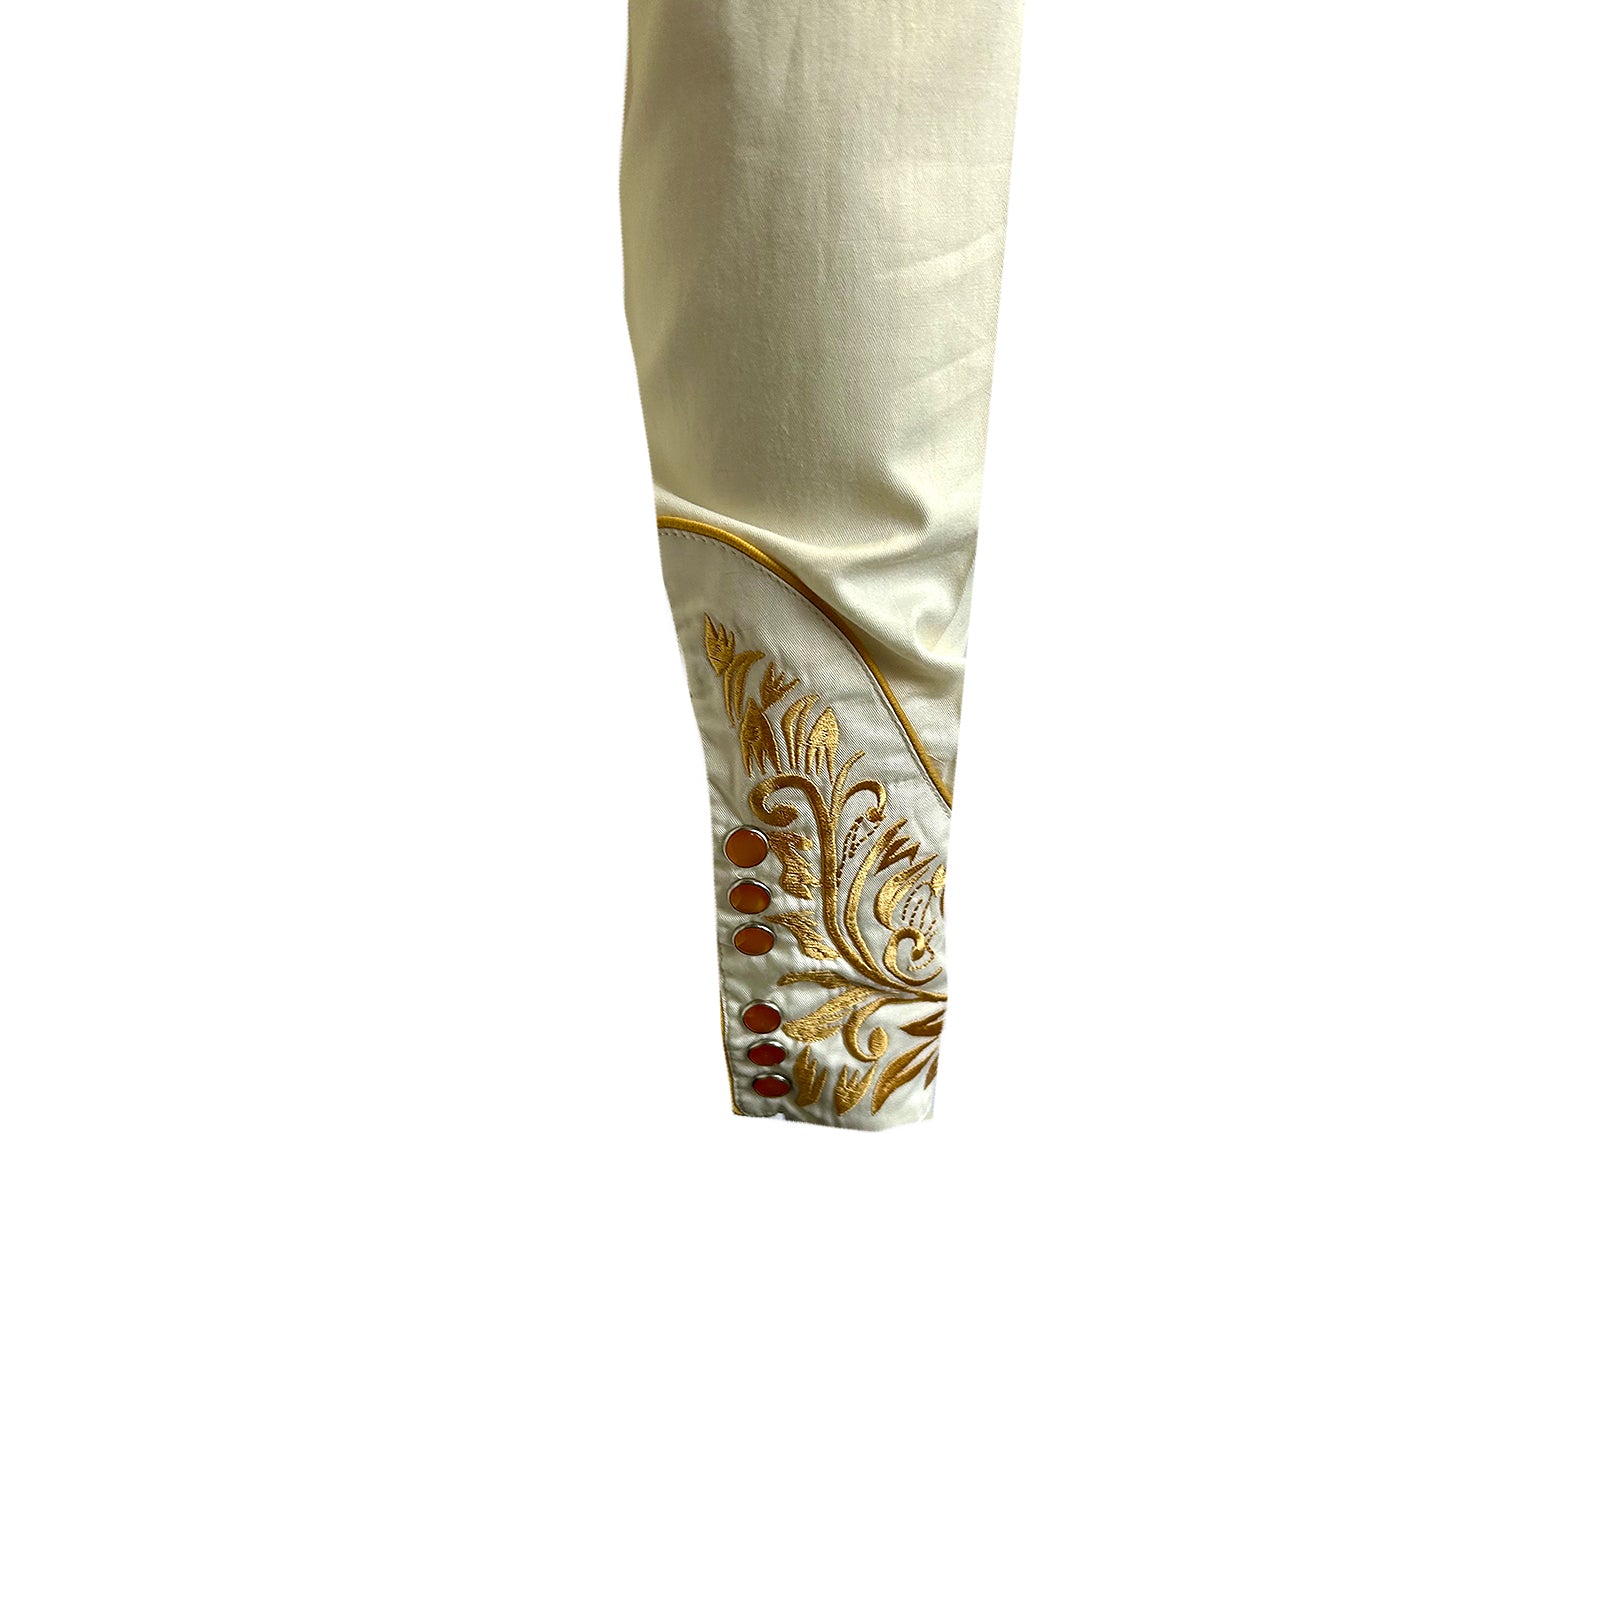 Men's Vintage Ivory with Gold Tooling Embroidery Shirt